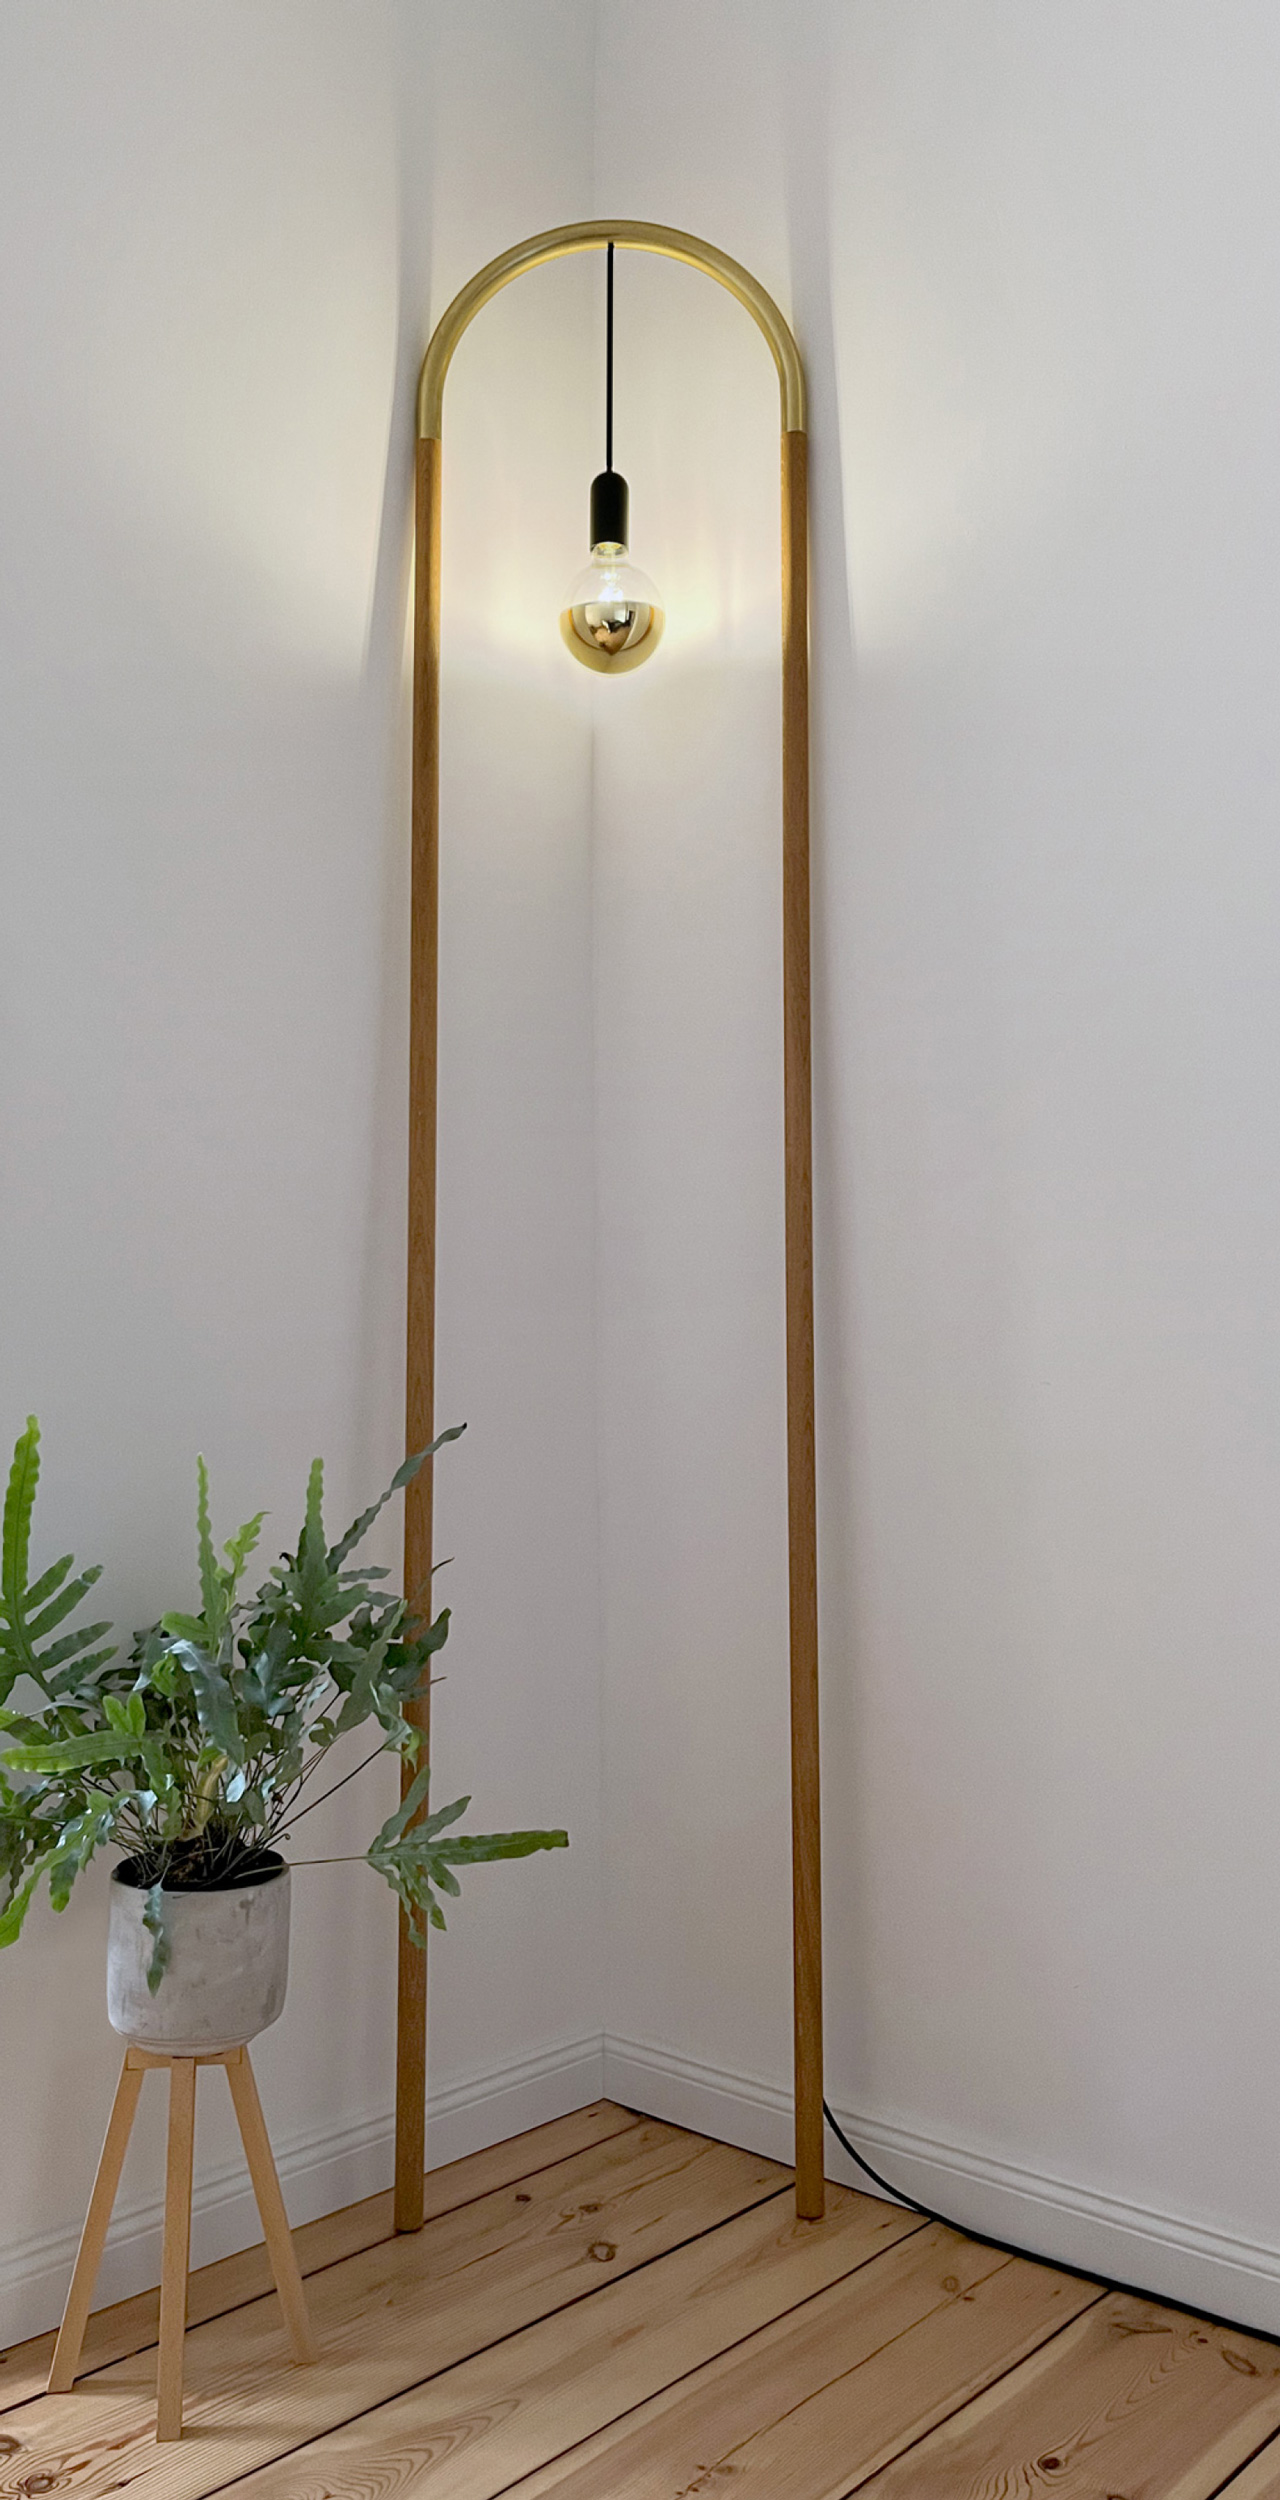 Photograph of the whole Frame light in the corner of a room next to a potted plant.